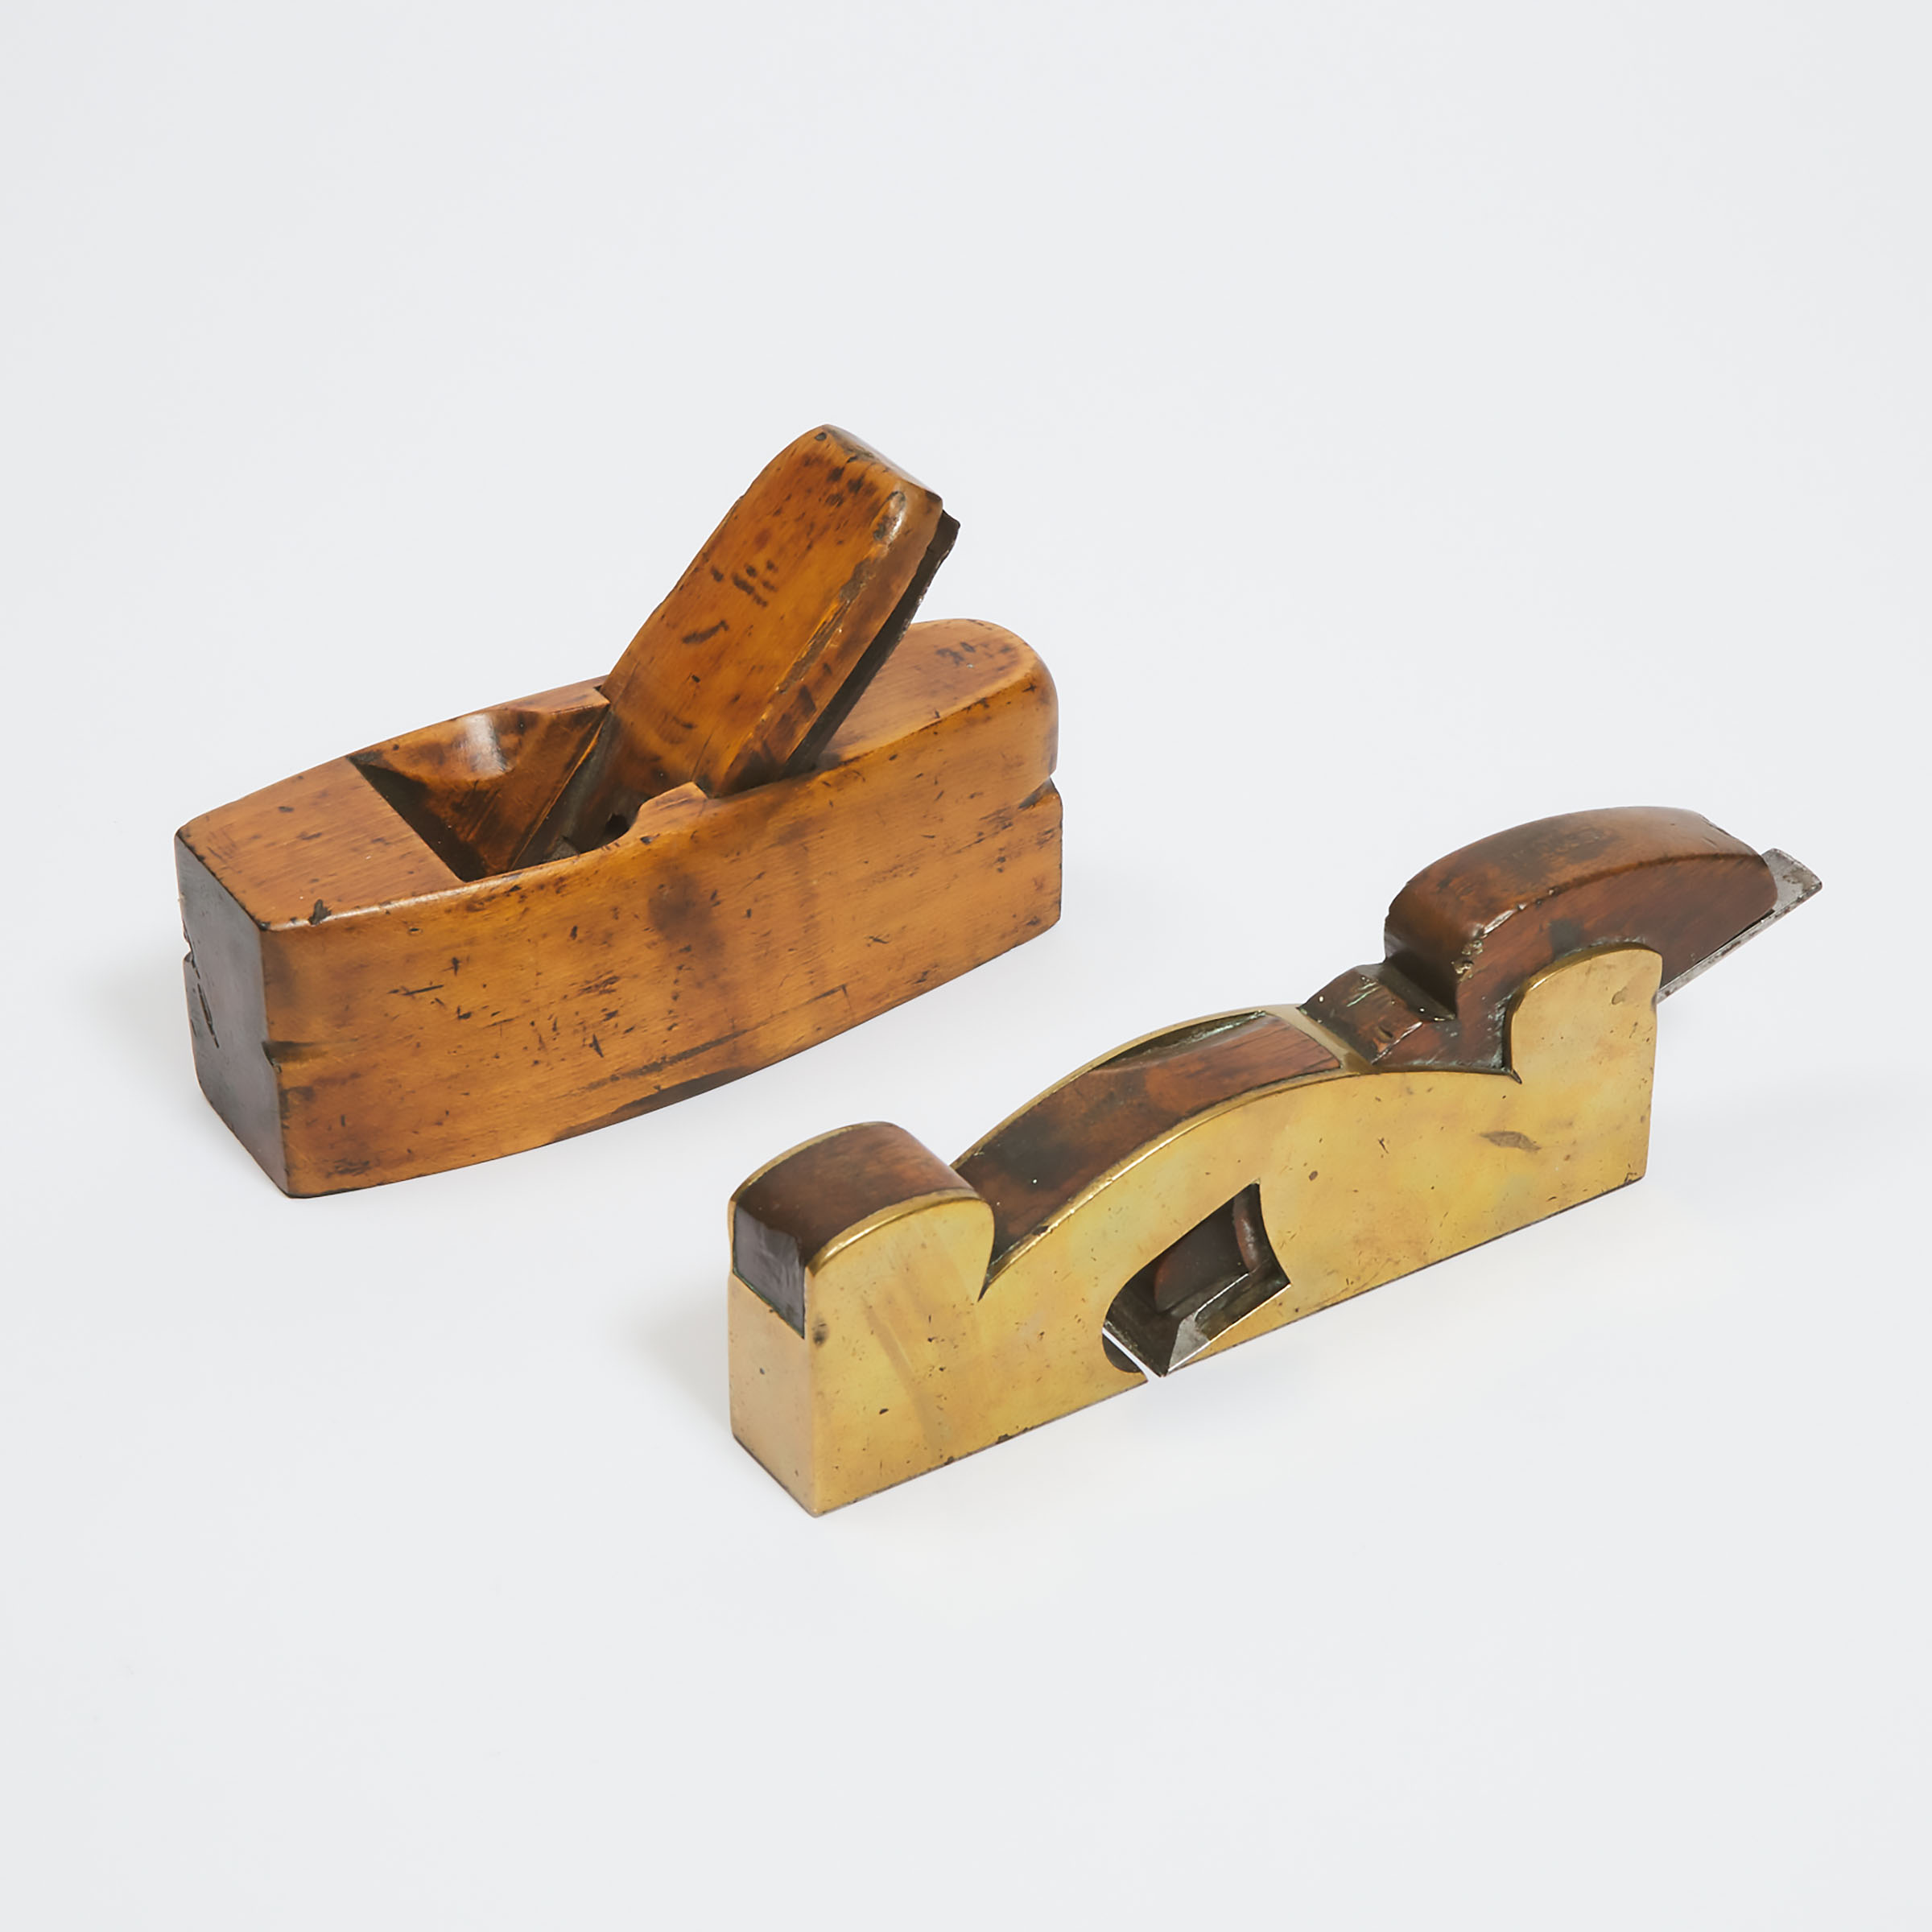 English Brass and Oak Shoulder Plane by James Howarth, Clerkenwell, London, together with a Maple Block Plane, mid 19th century